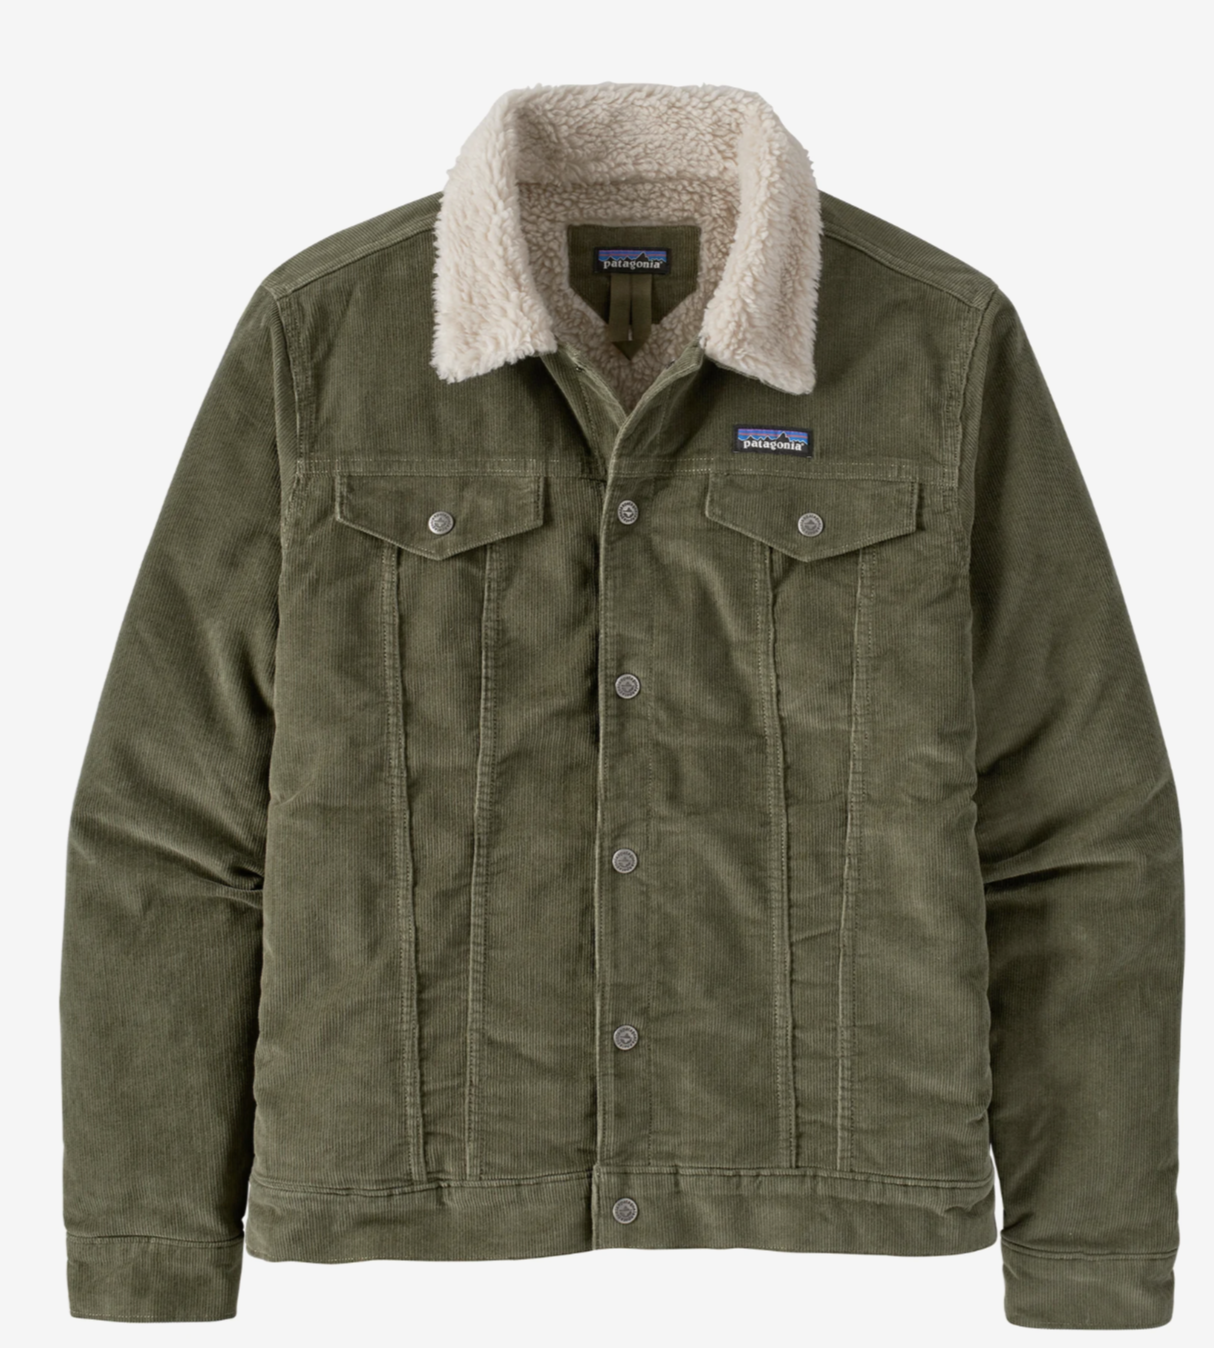 Patagonia M's Pile Lined Trucker Jacket